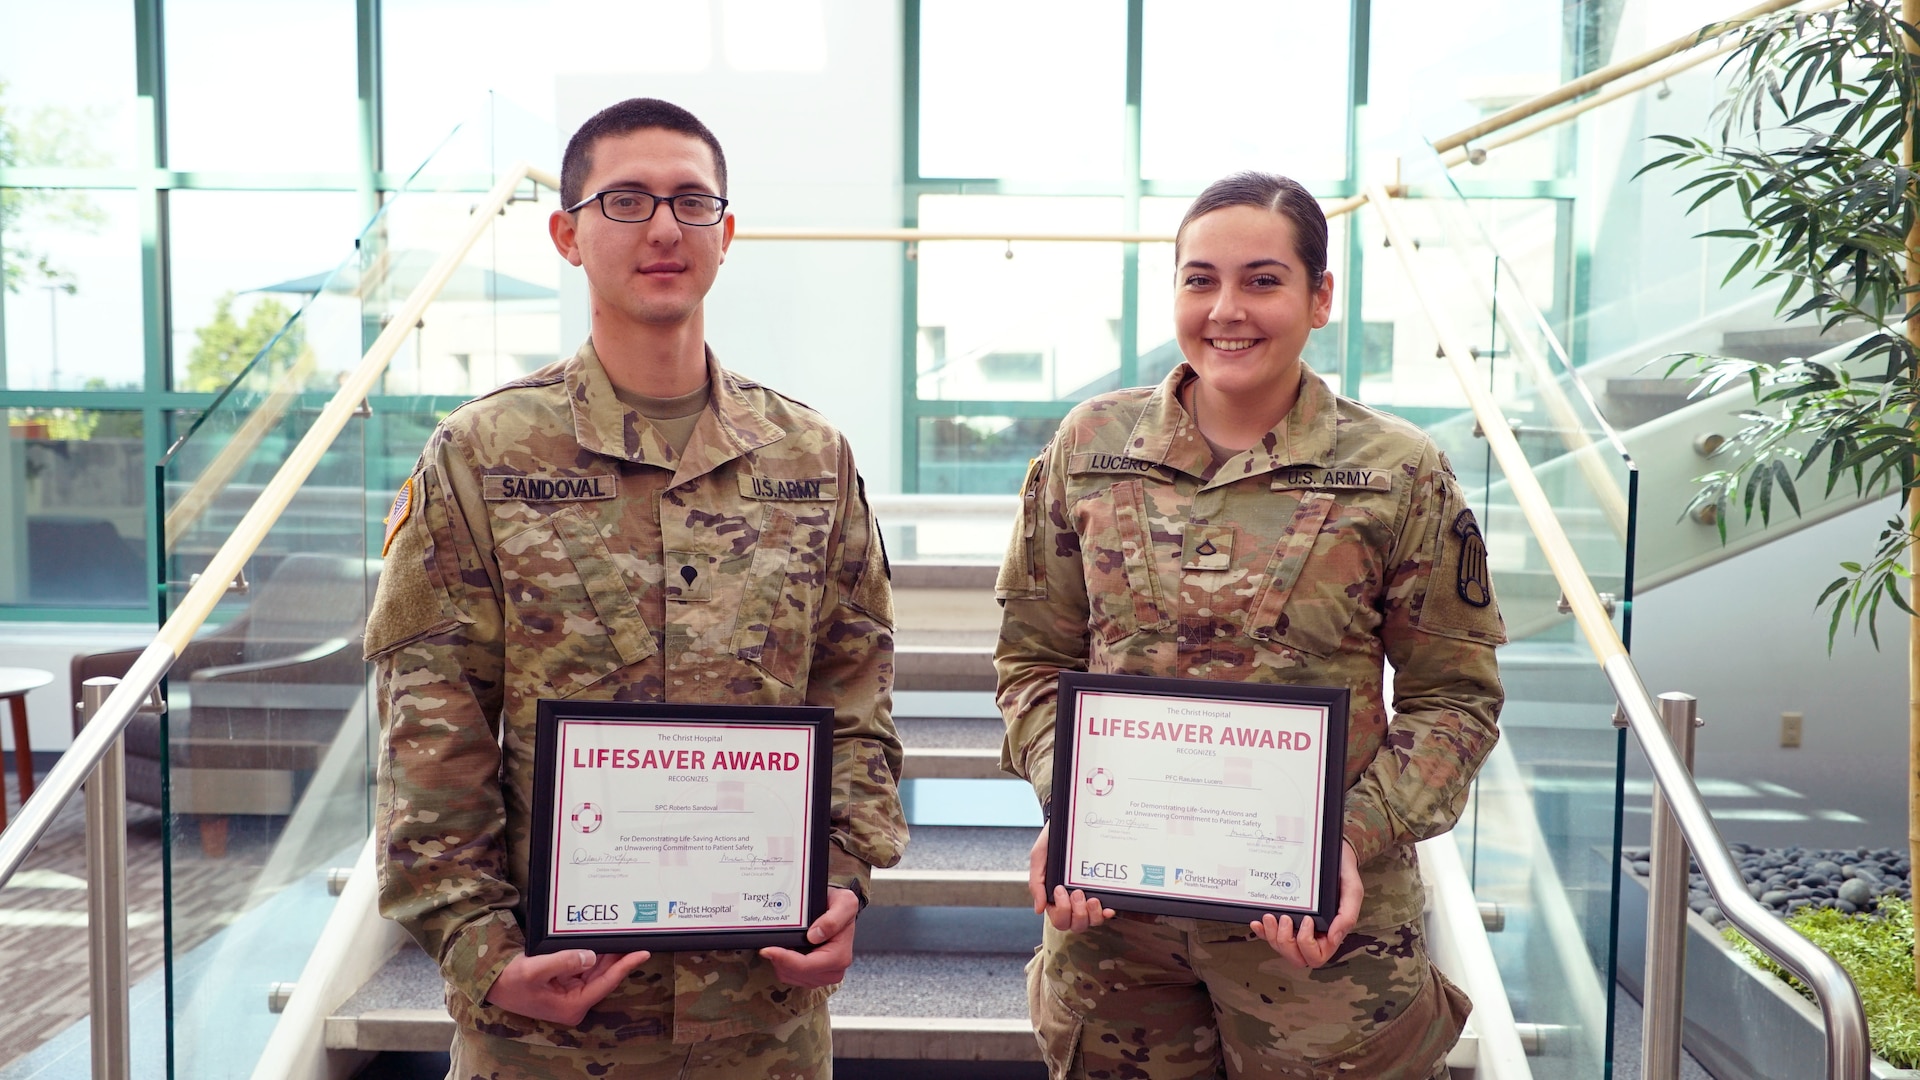 New Mexico Army National Guard Soldiers Spc. Roberto Sandoval and Pfc. RaeJean Lucero, both 68W’s (Combat Medics), were honored by The Christ Hospital in Cincinnati on May 16, 2019. The Soldiers were responsible for saving the life of a man who was seriously injured in a motor vehicle accident.  Sandoval and Lucero are participants in the Strategic Medical Asset Readiness Training (SMART) program with The Christ Hospital in Cincinnati.